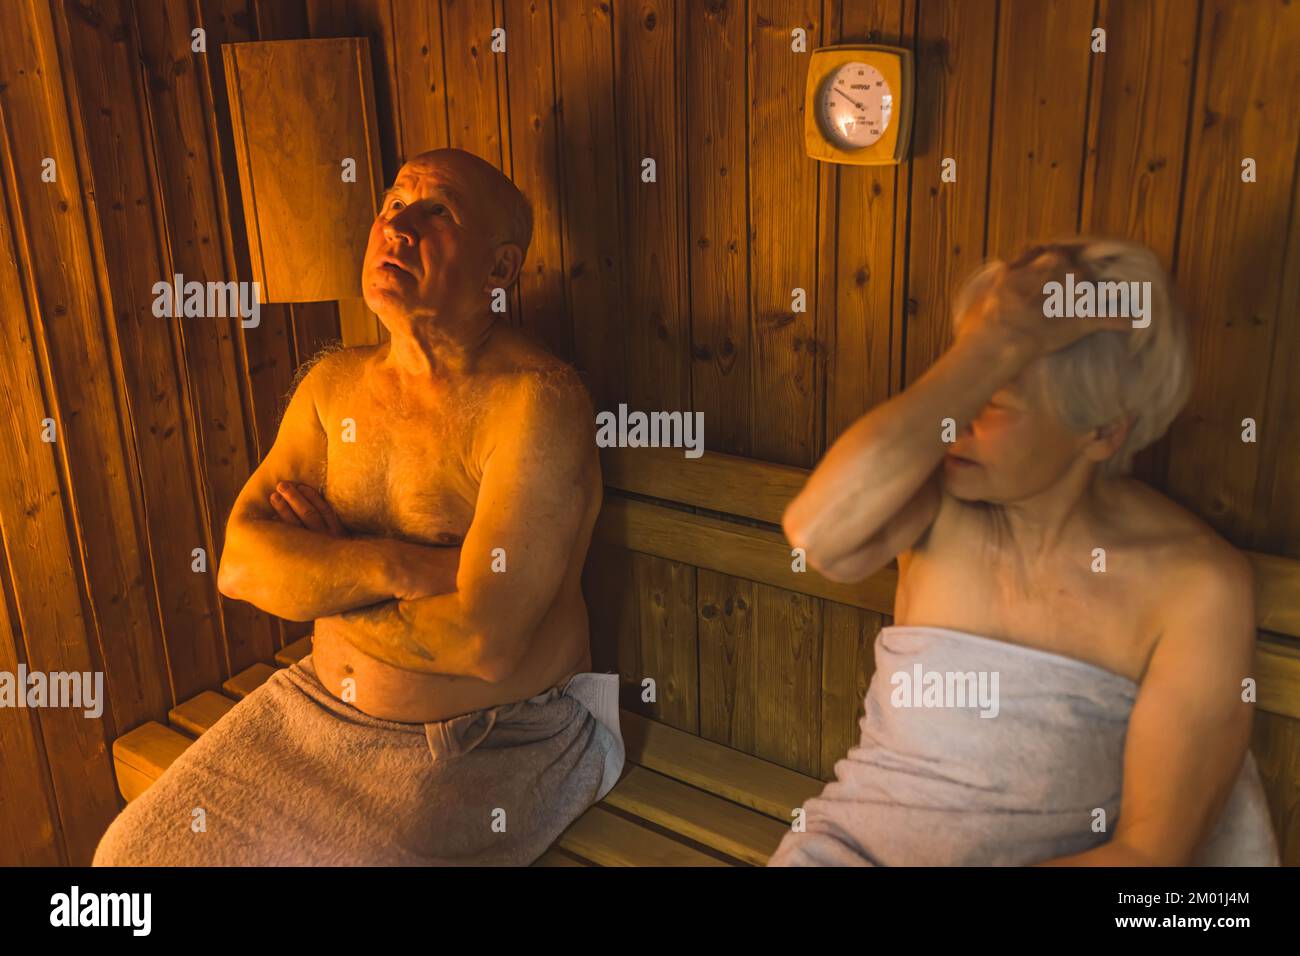 Two caucasian elderly people - bald man and short-haired woman - sit together in a wooden sauna in gray cotton bathrobes. SPA and relaxation concept. High quality photo Stock Photo